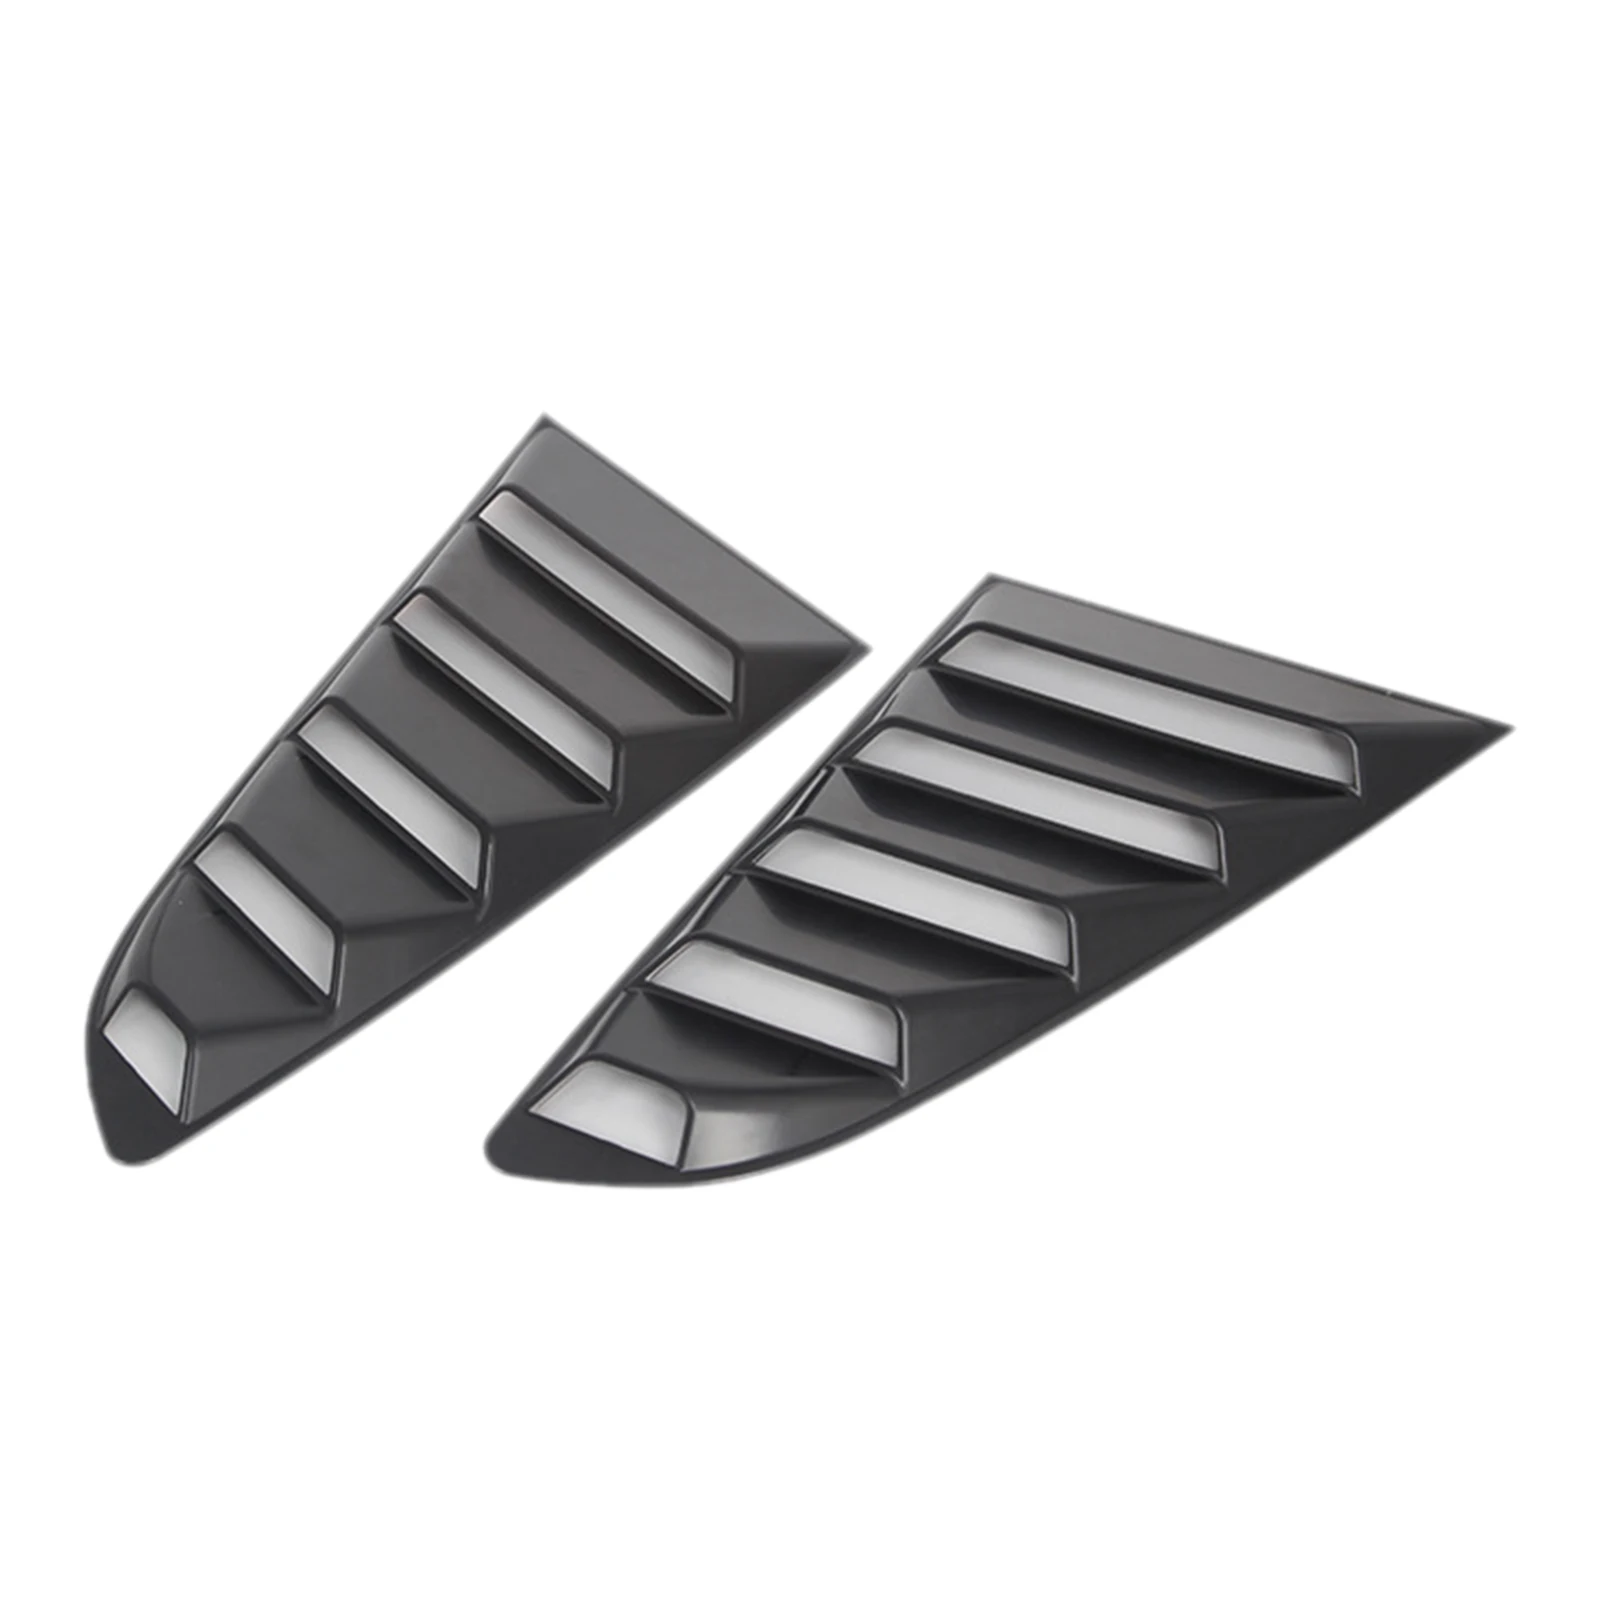 ABS Rear Quarter Side Window Louvers Spoiler Panel Air Vent Scoop Shades for Ford Mustang 2015 2016 2017 2018 2019 2020 2021